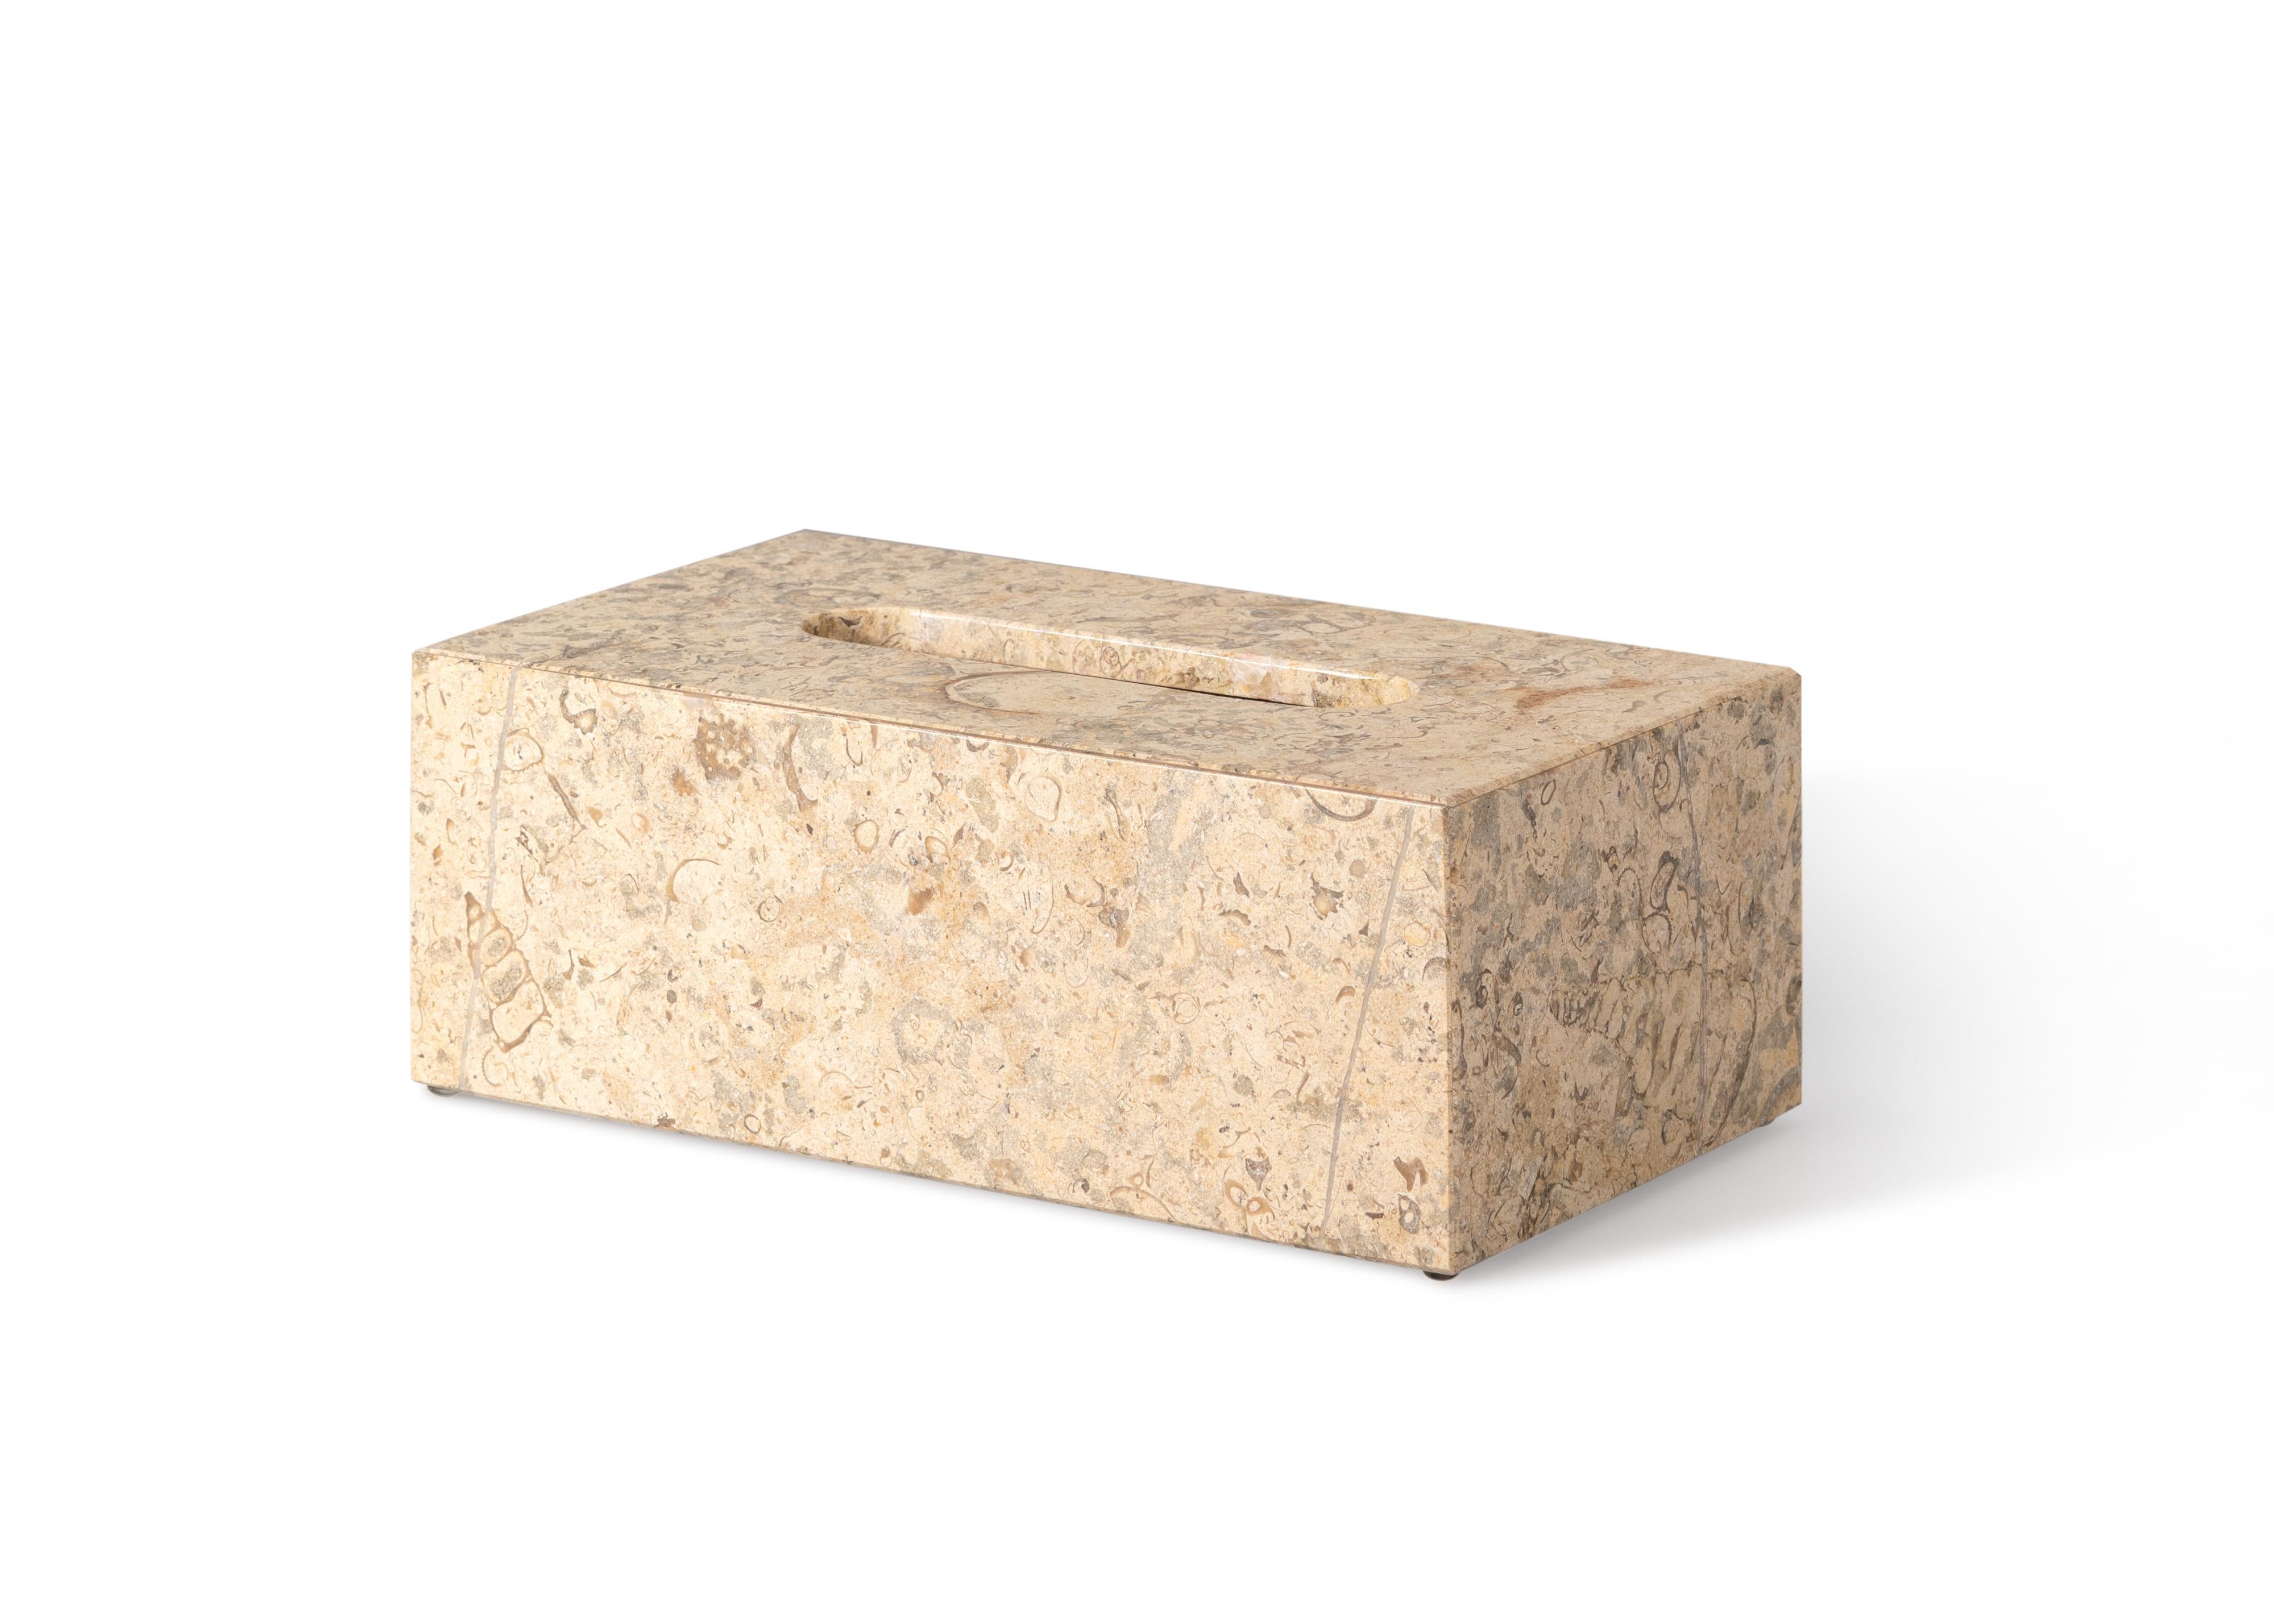 Crafted entirely by hand, this marble tissue box cover is a fusion of form and function, seamlessly blending into any space while adding sophistication and elegance. Clean, minimalist lines highlight the natural veining of the marble, making each